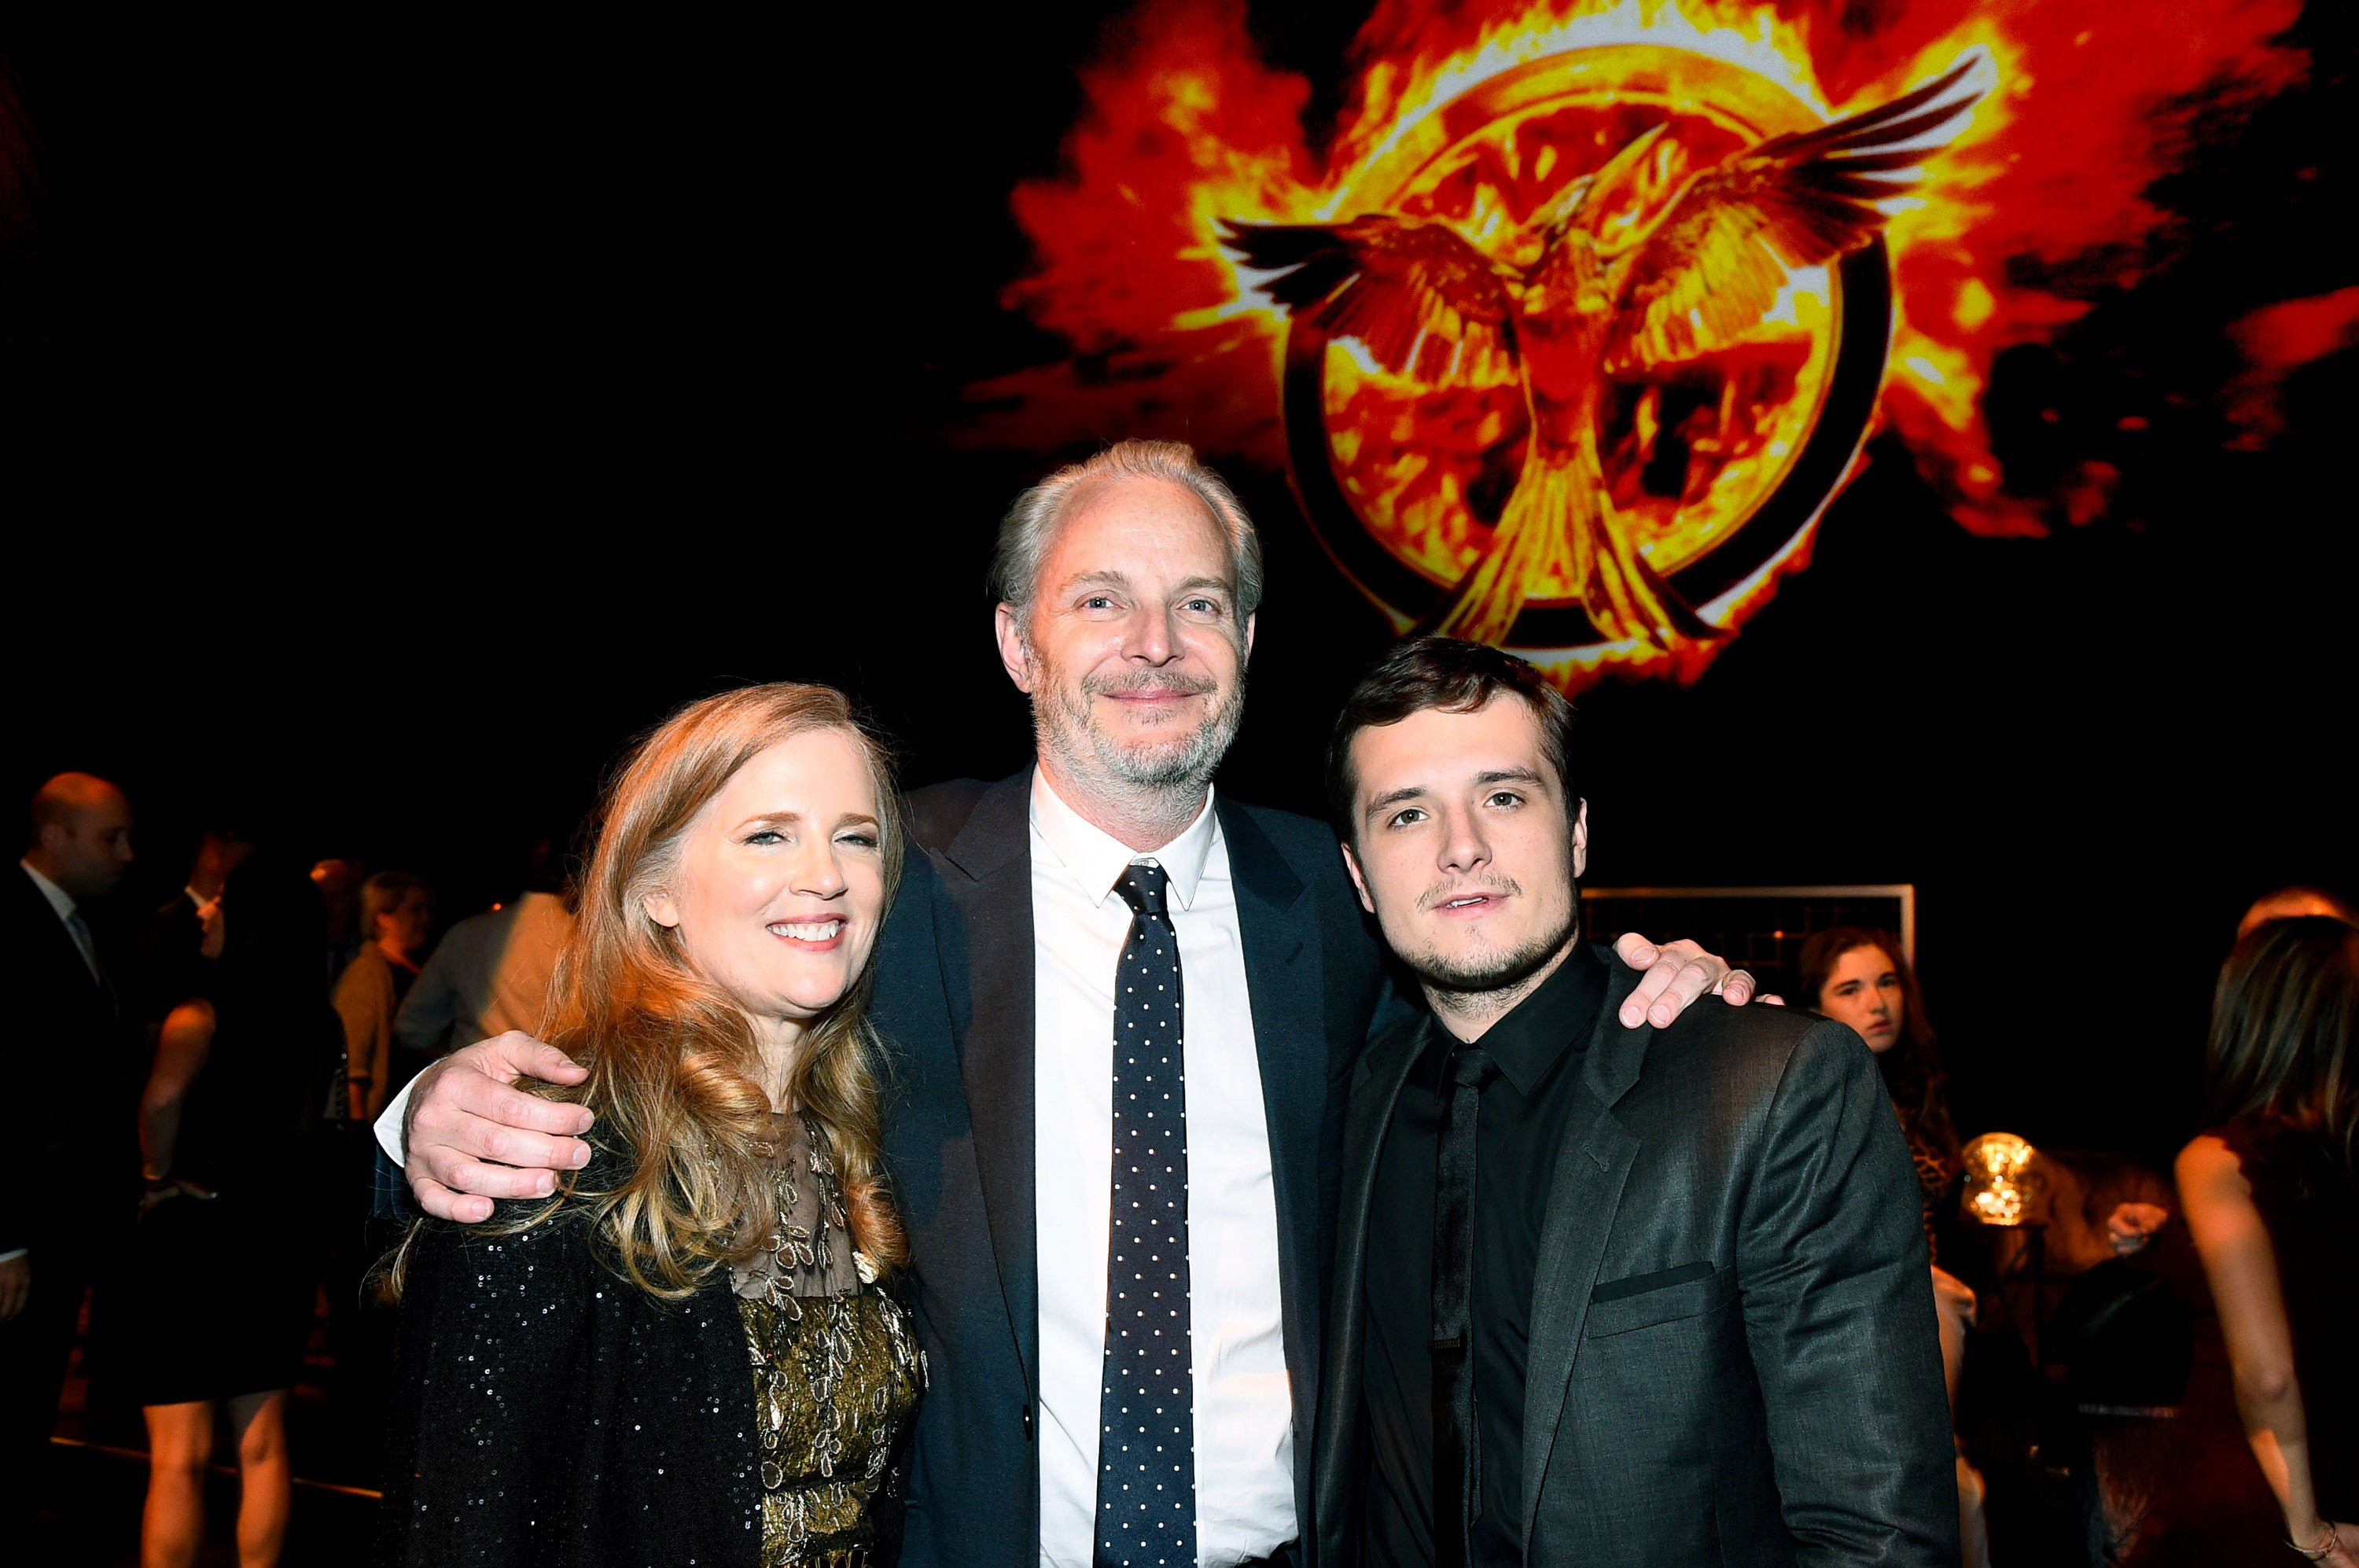 Suzanne Collins, author the Hunger Games books, Francis Lawrence, and Josh Hutcherson